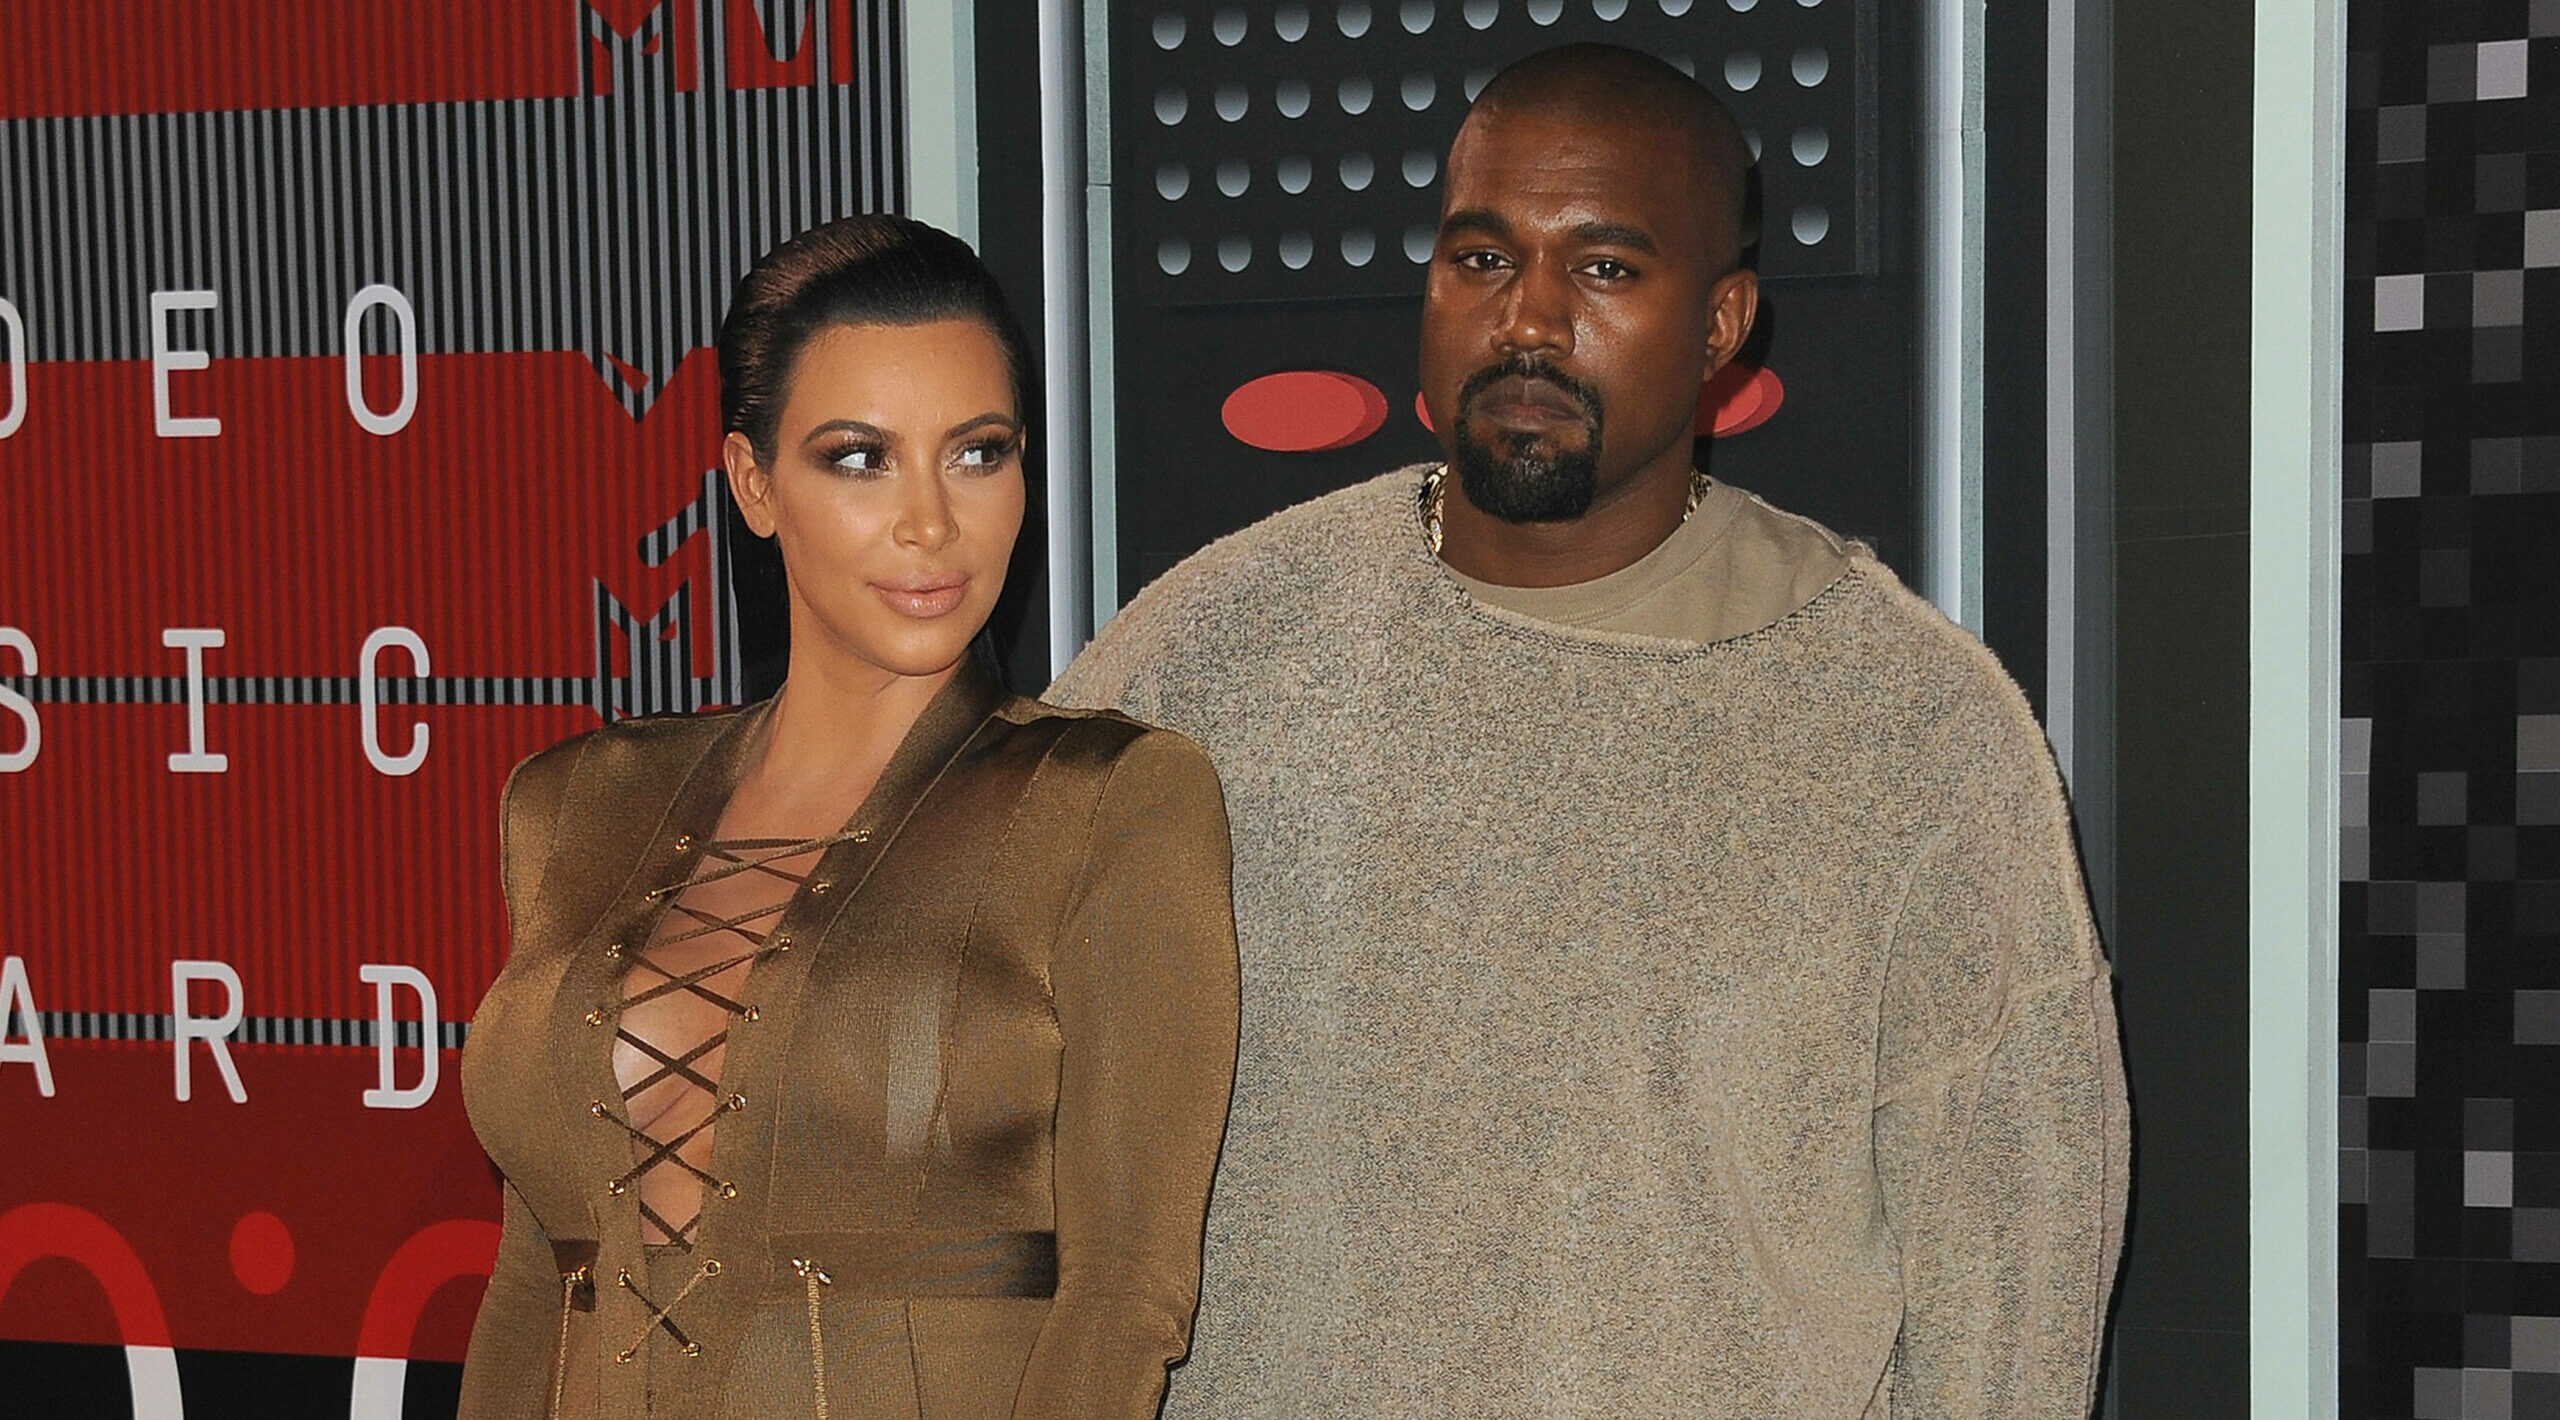 Kanye West's New Love Life: How Kim Kardashian and Her Sisters Are Still Making Waves in His World